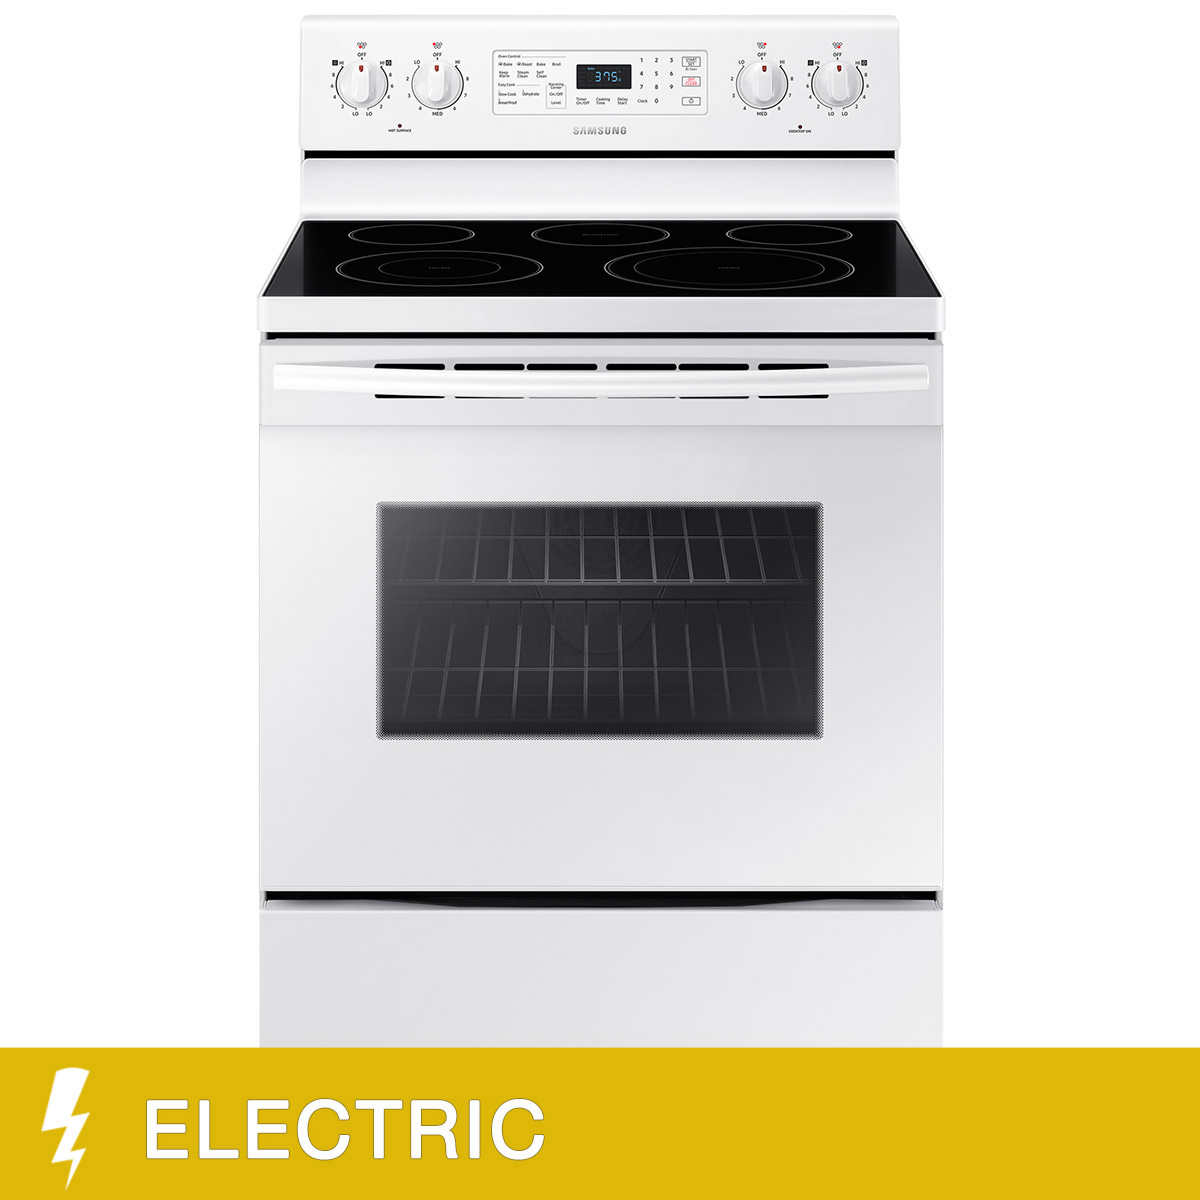 Ranges | Costco - Freestanding Electric Range with Expandable Elements